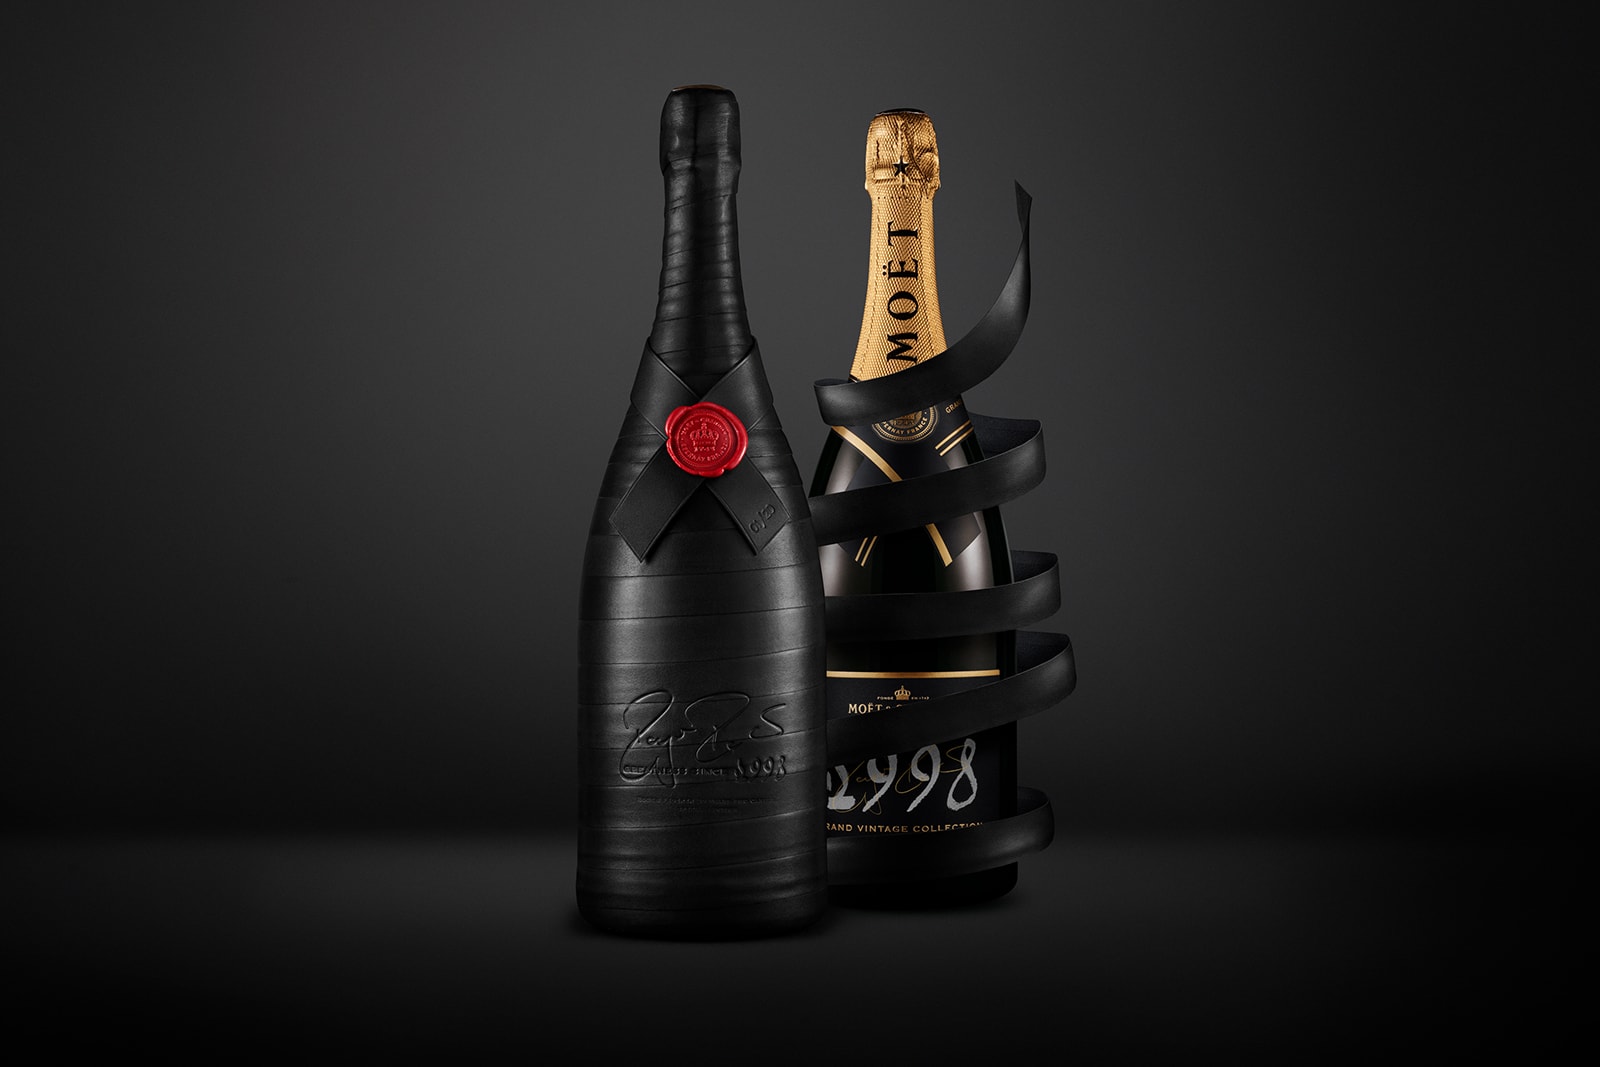 Moët & Chandon “GREATNESS SINCE 1998” Collection